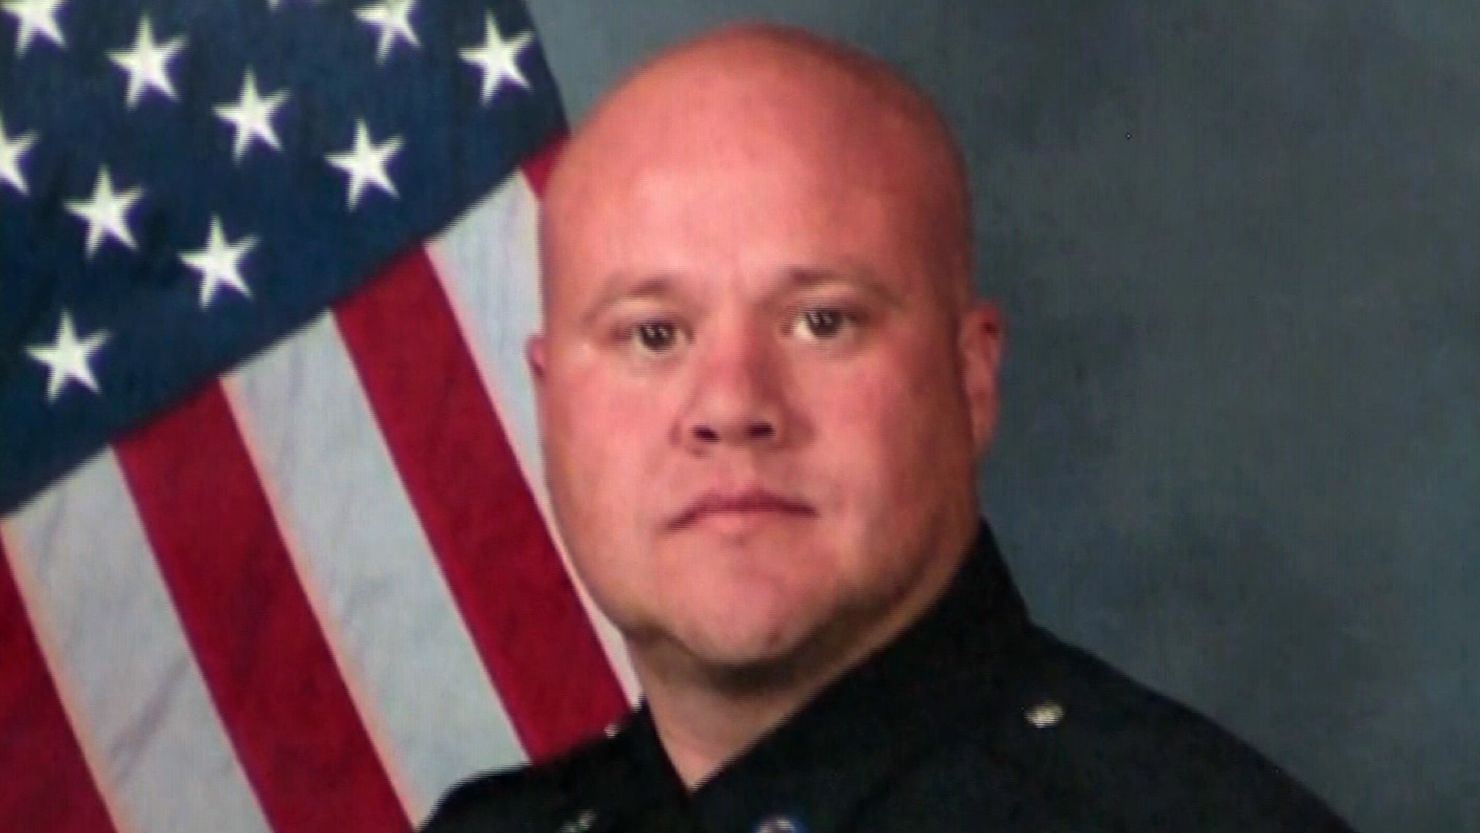 Officer David Sherrard was a 14-year veteran of the Richardson Police Department.